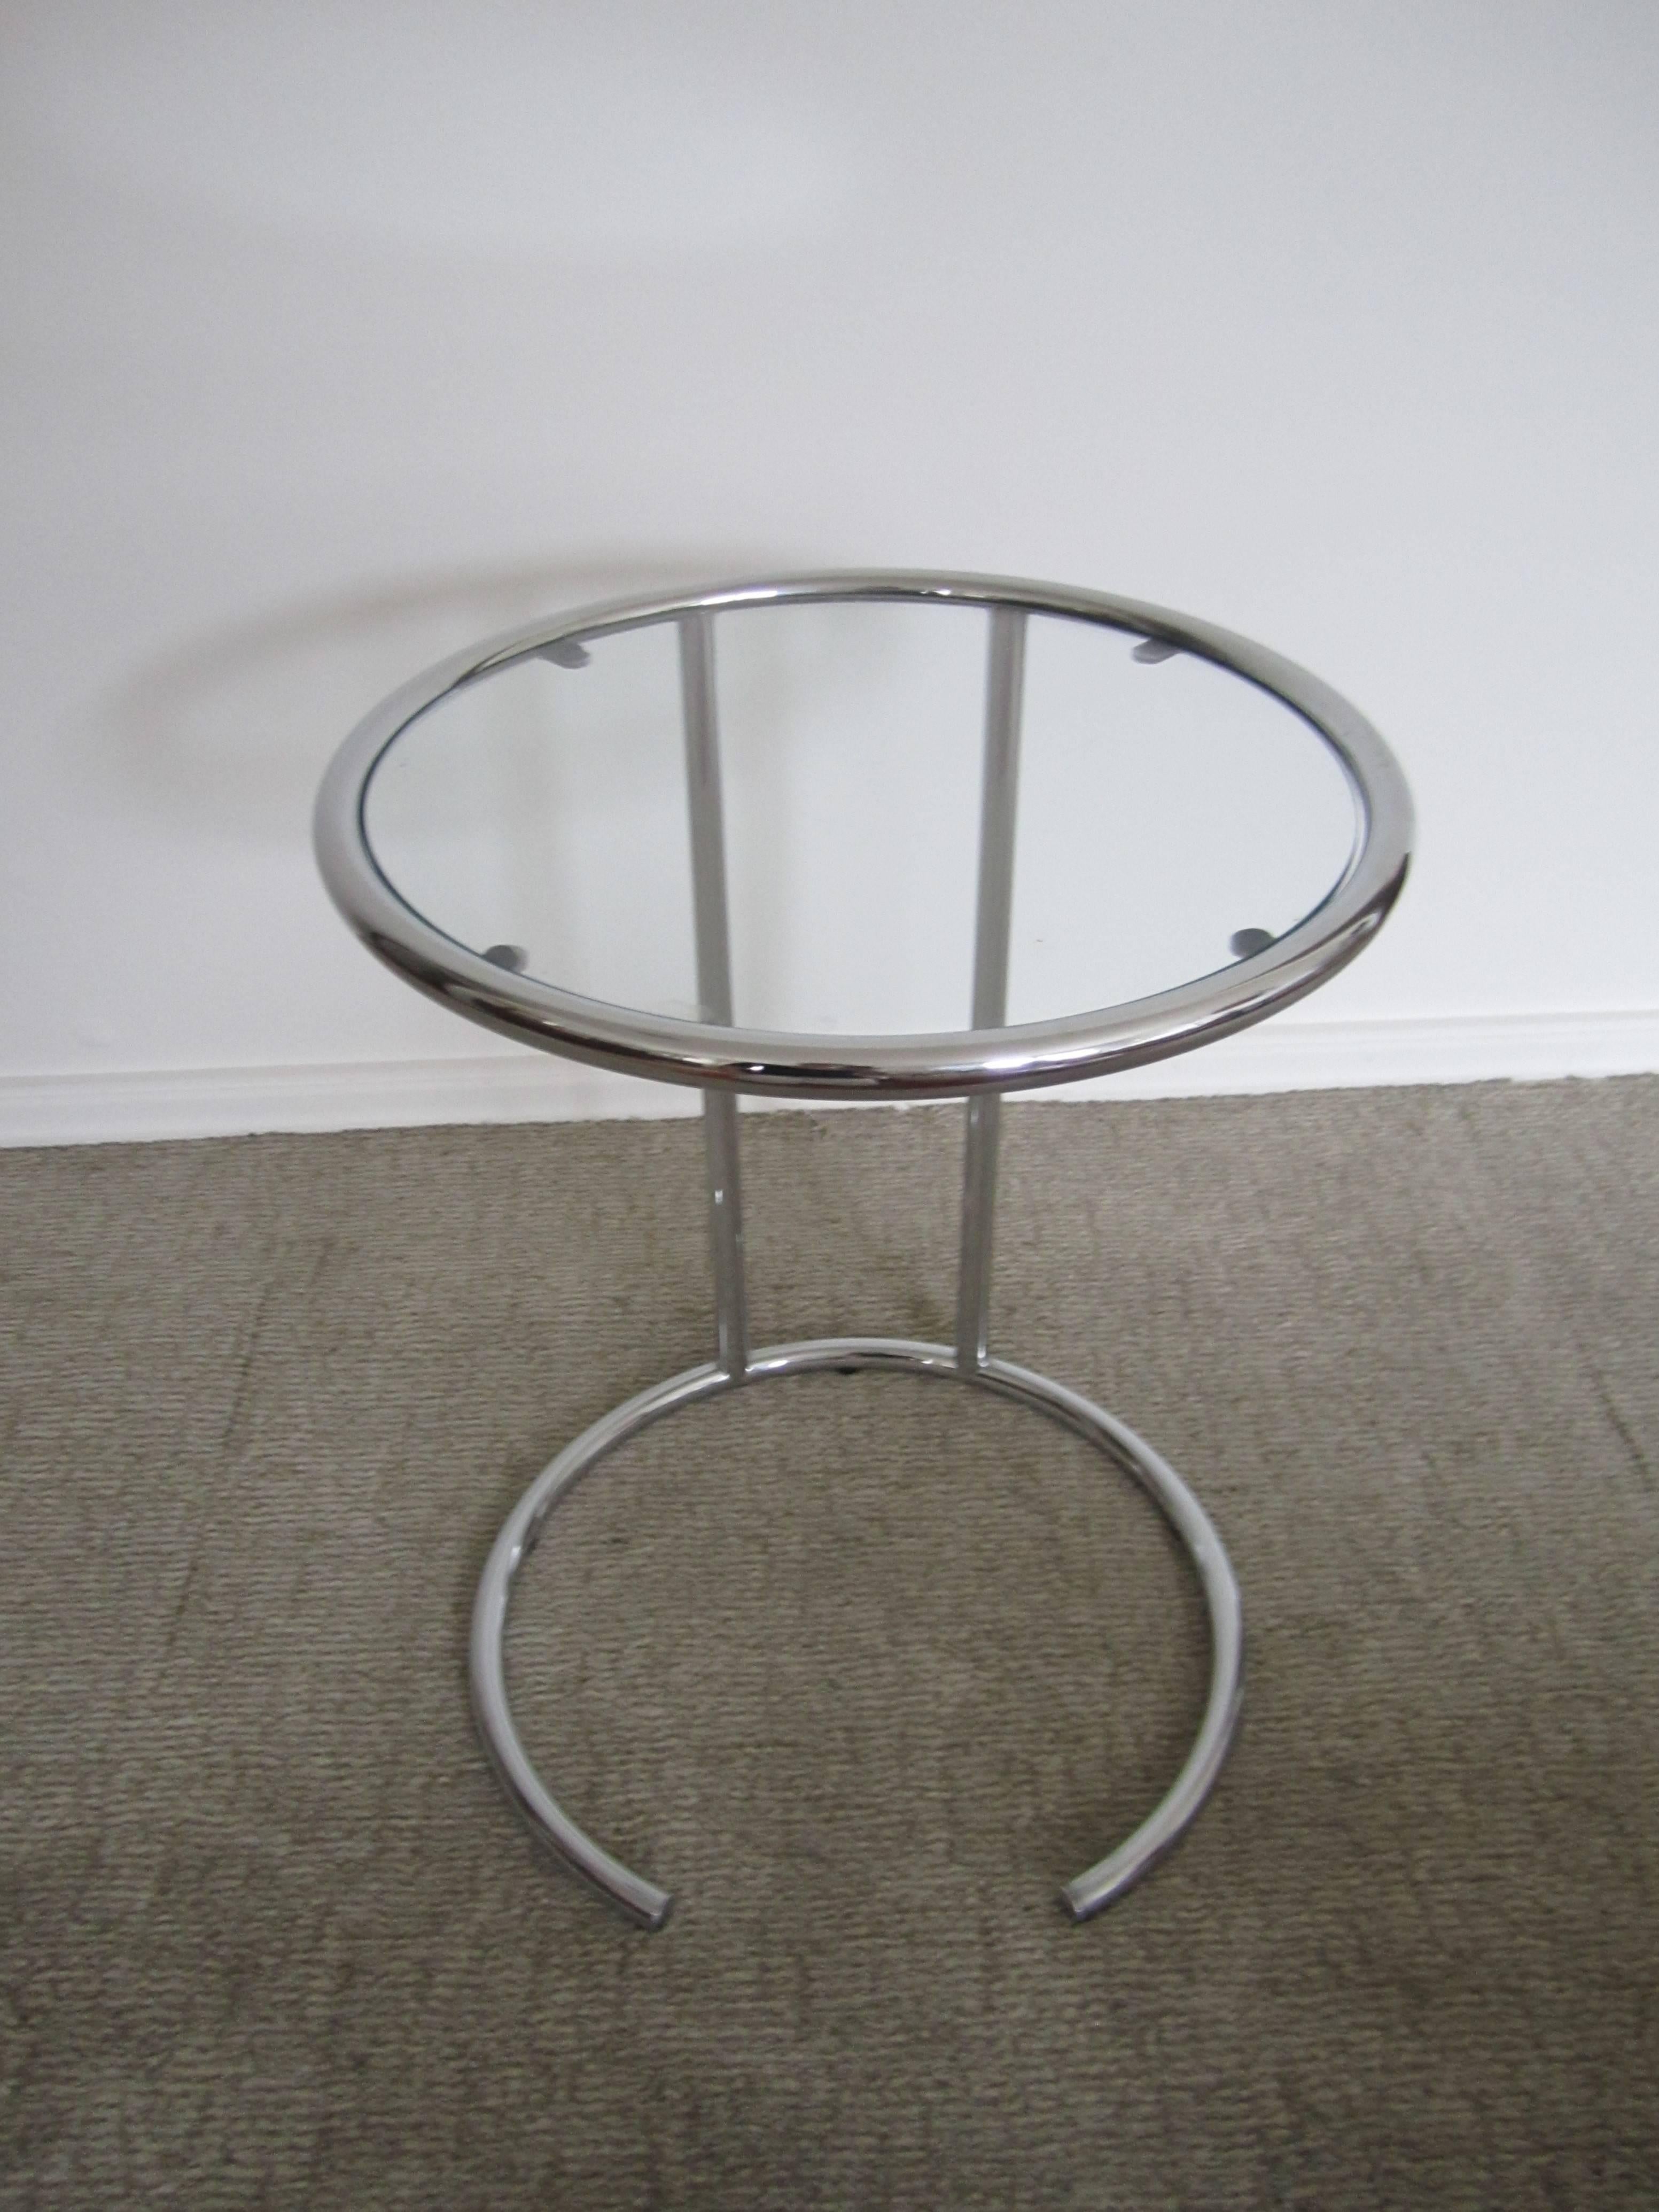 A vintage modern round chrome and glass side table, marked "Made in Italy" on bottom as show in image. Circular top supported by a semi-circular base. Circa 1970s. Measurements include: 21" h x 14.5" diameter. Item available here